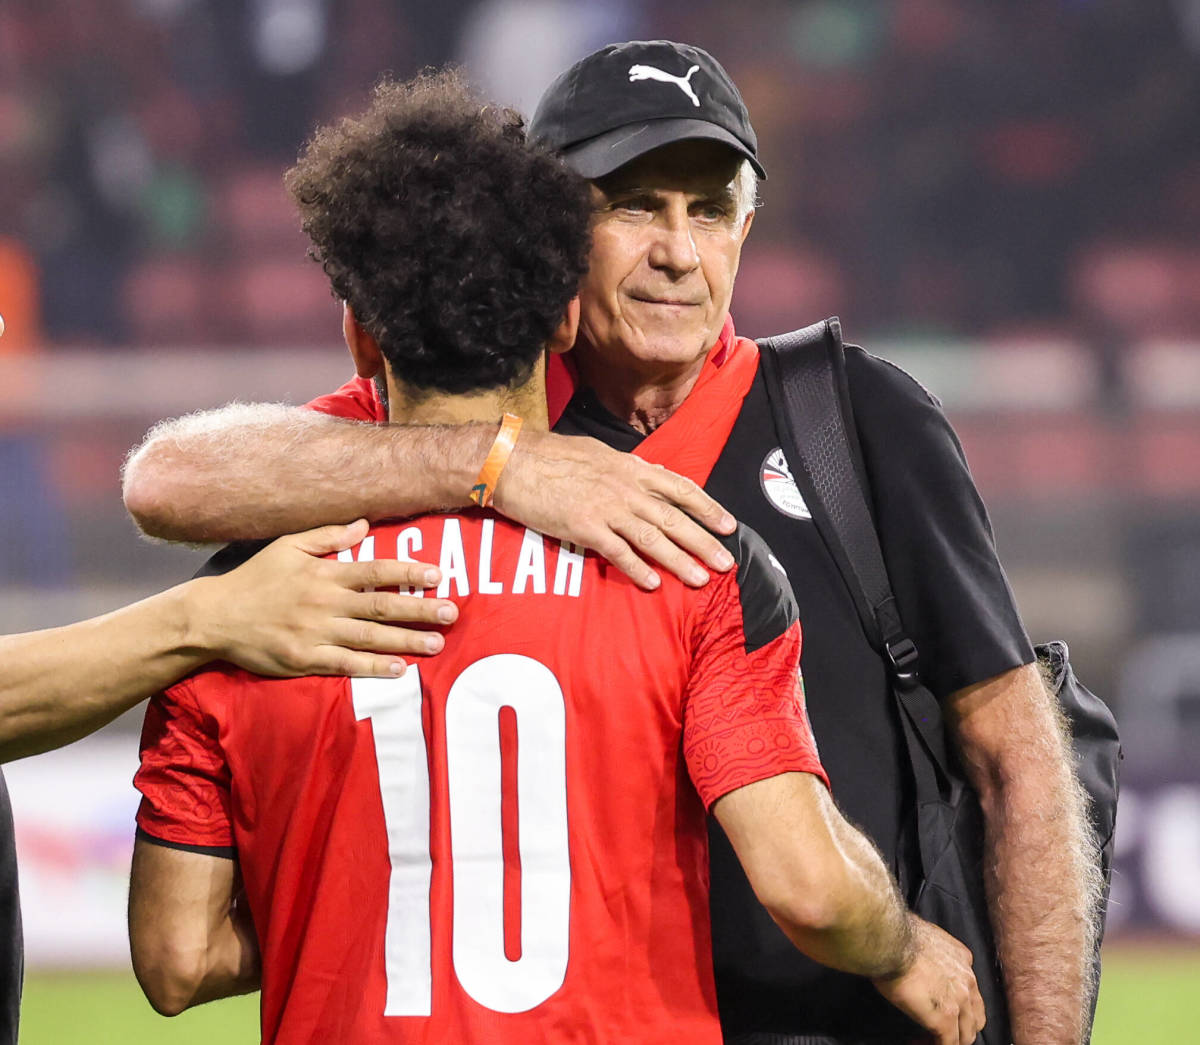 Carlos Queiroz pictured hugging Mo Salah after Egypt lost the final of AFCON 2021 to Senegal